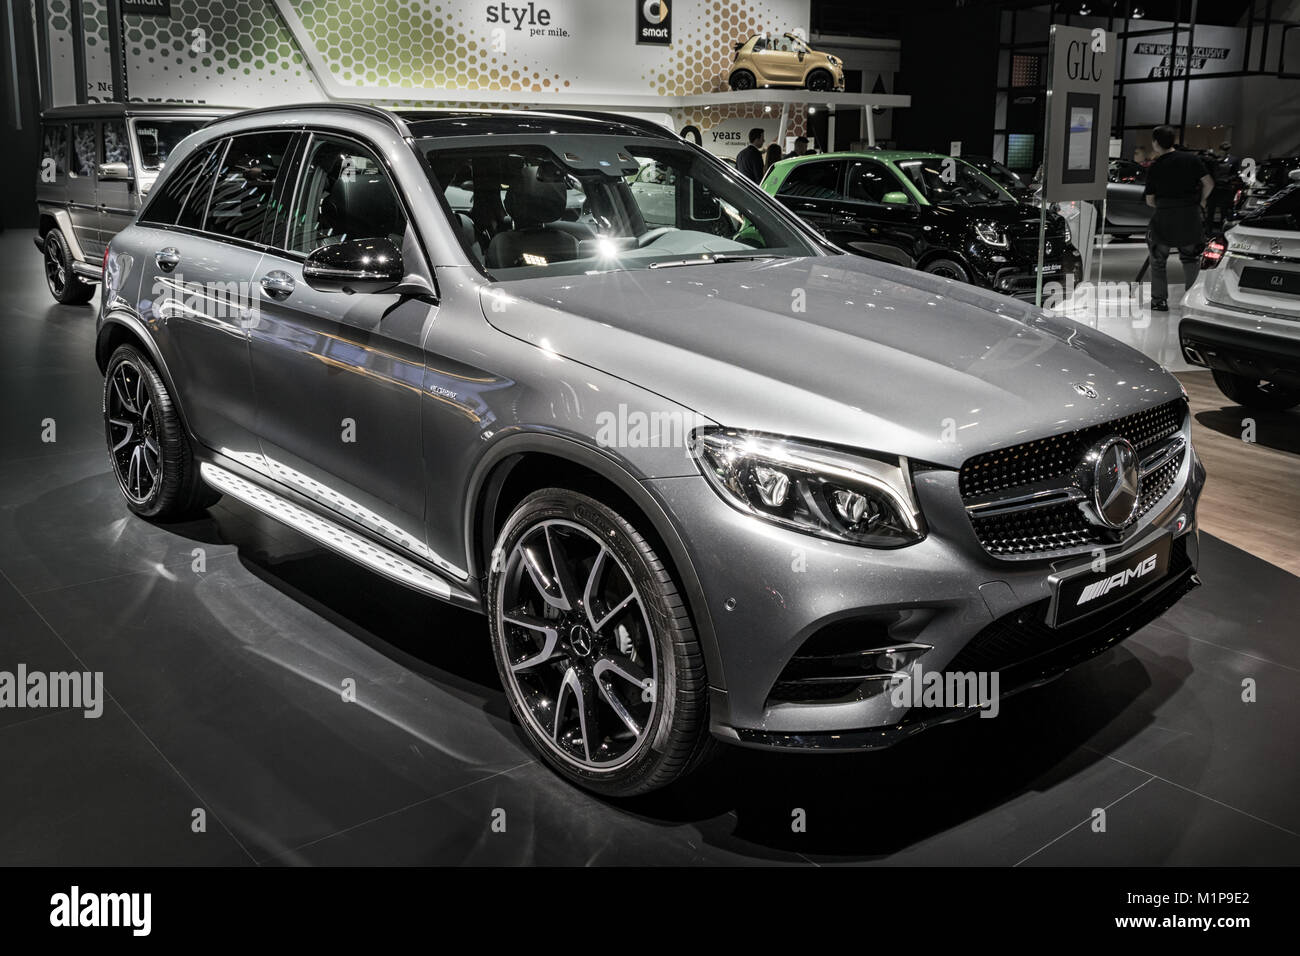 BRUSSELS - JAN 10, 2018: Mercedes AMG GLC 43 4MATIC SUV car car shown at the Brussels Motor Show. Stock Photo